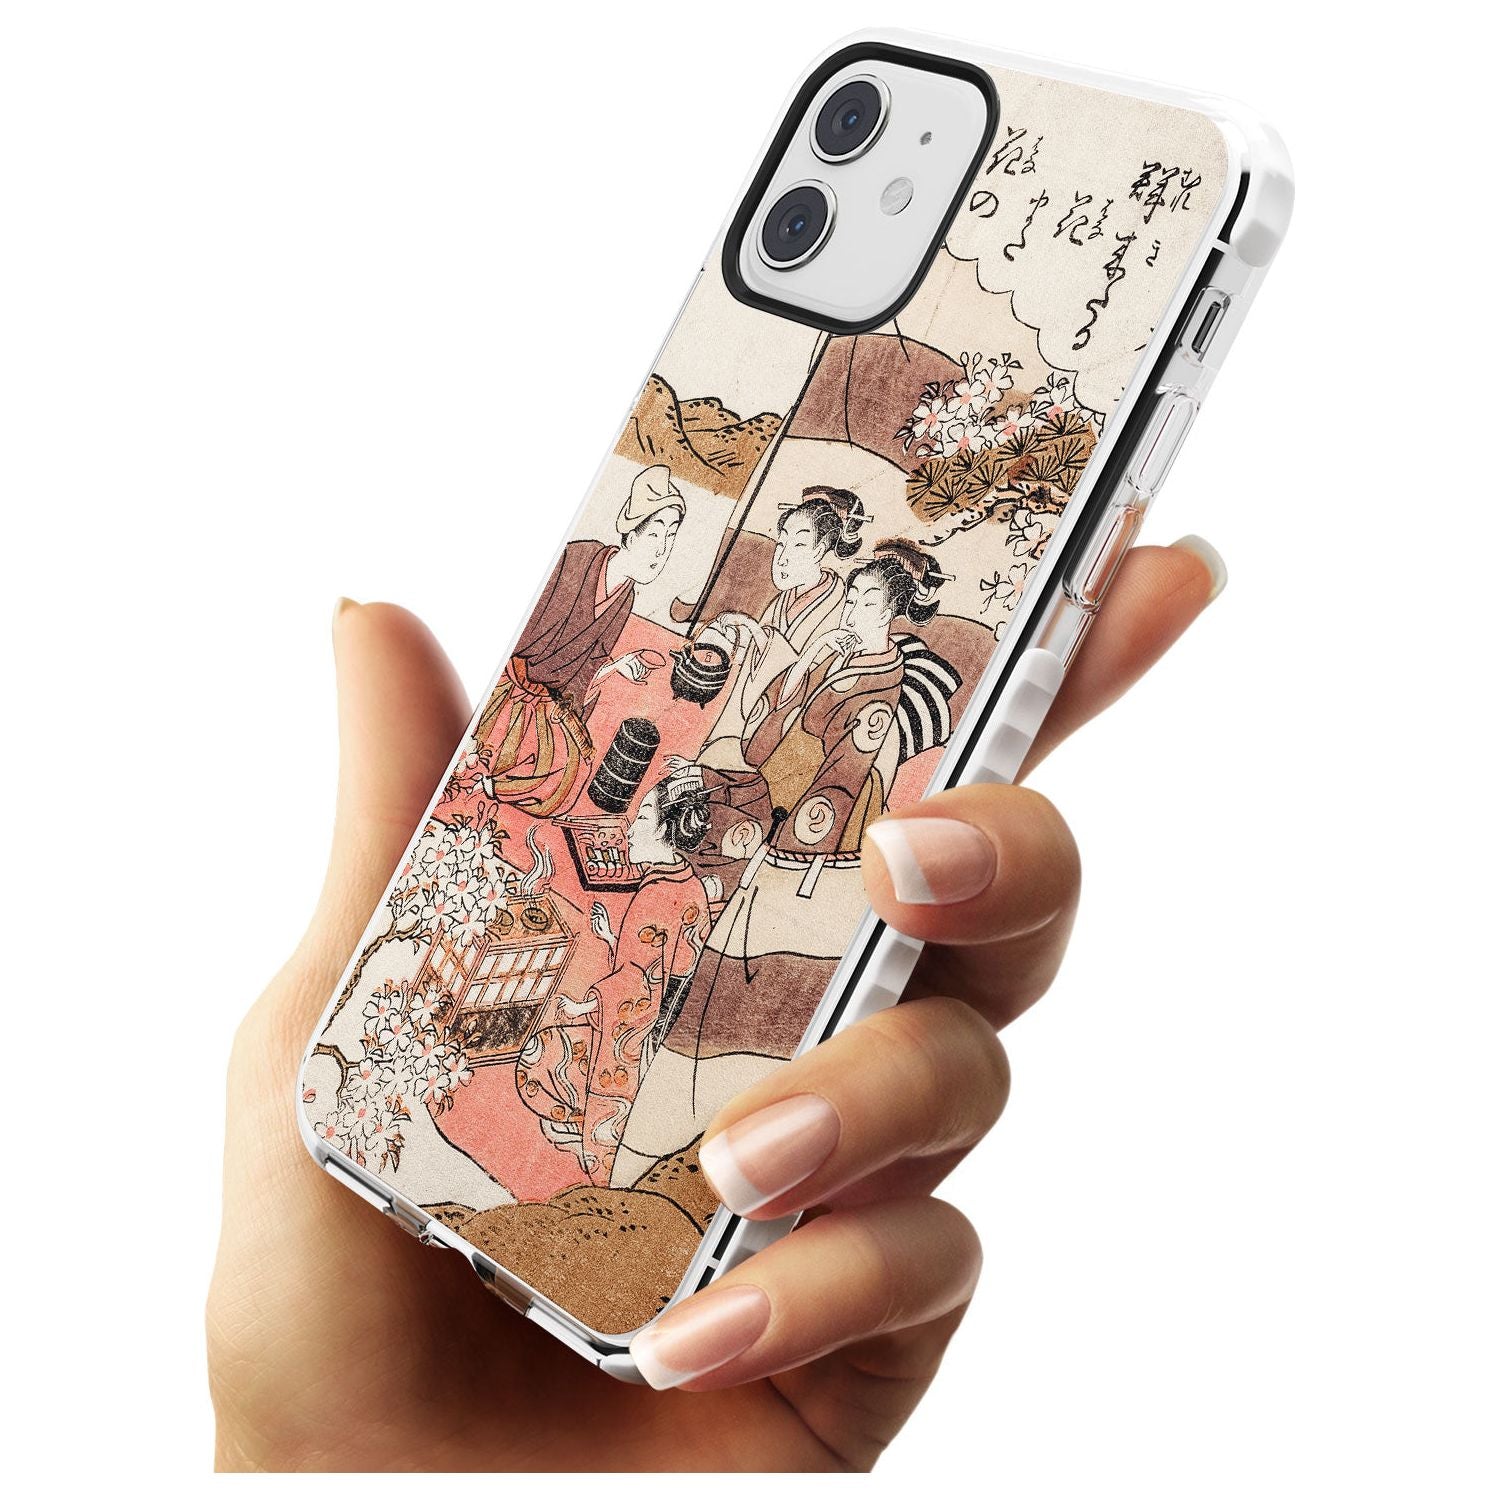 Japanese Afternoon Tea Impact Phone Case for iPhone 11